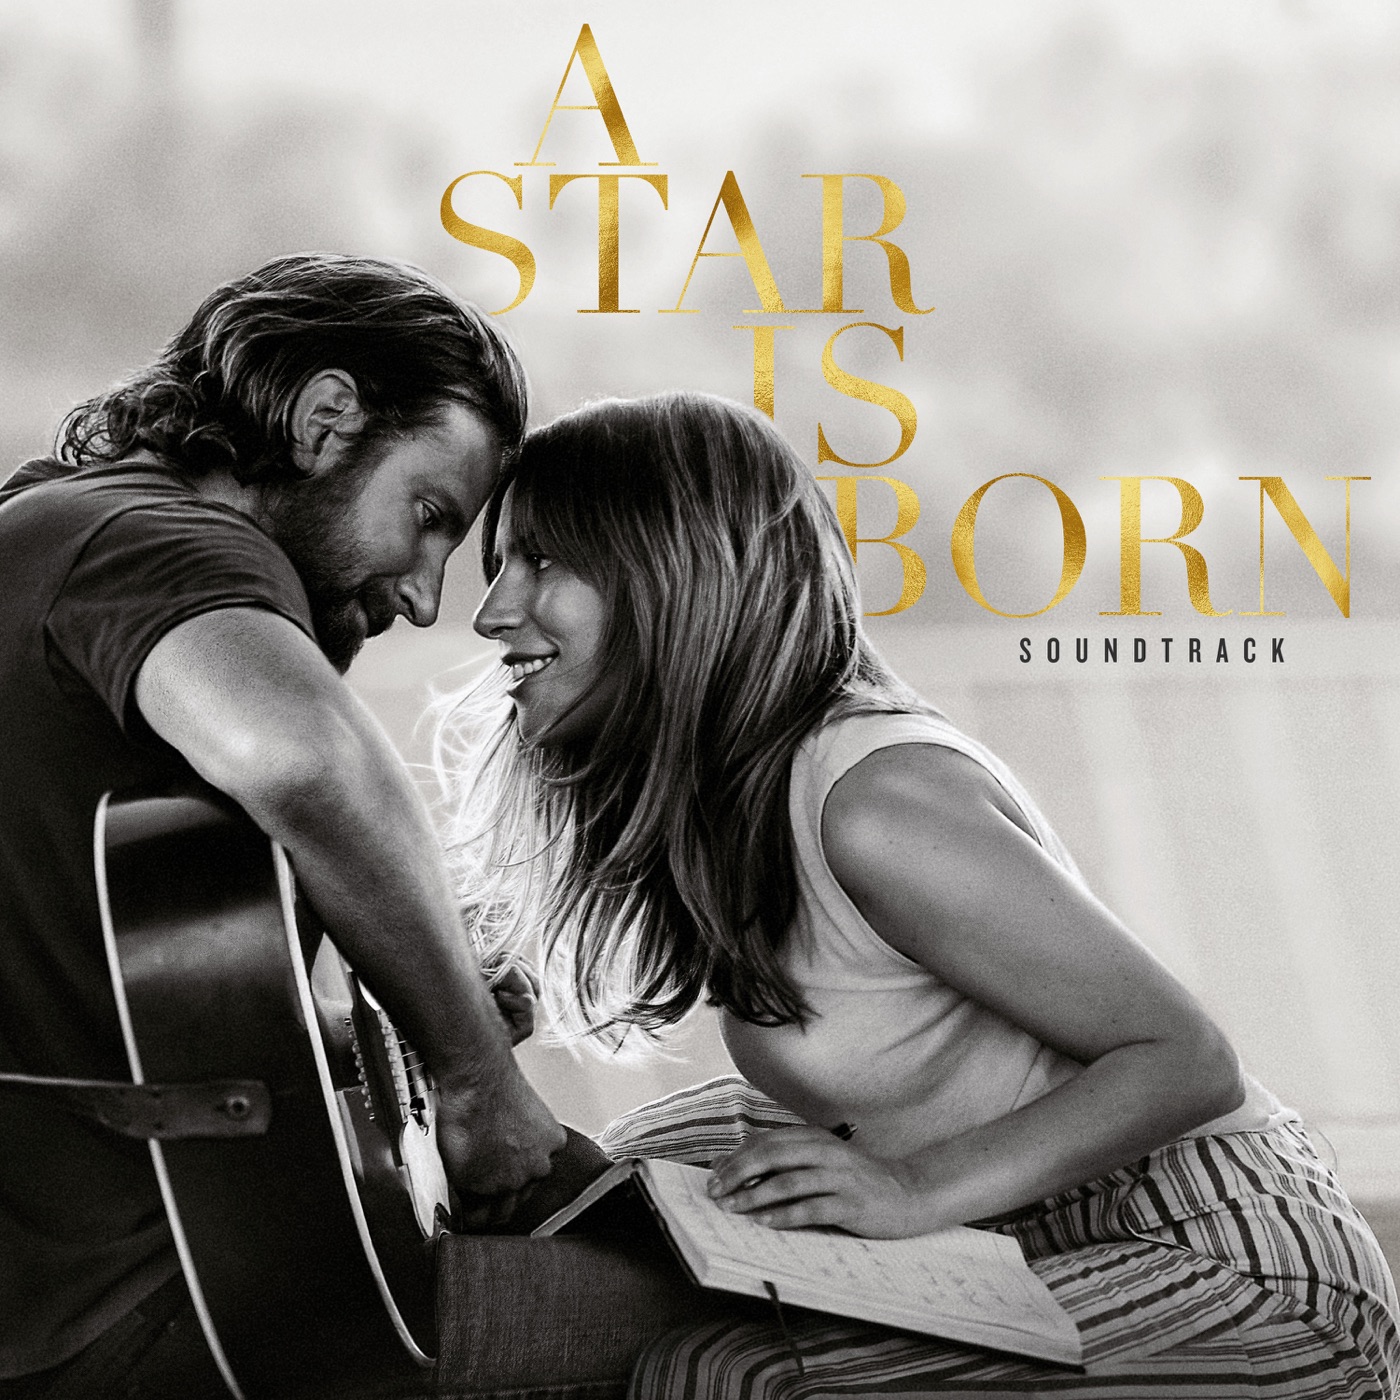 A Star Is Born Soundtrack (Without Dialogue) by Lady Gaga, Bradley Cooper